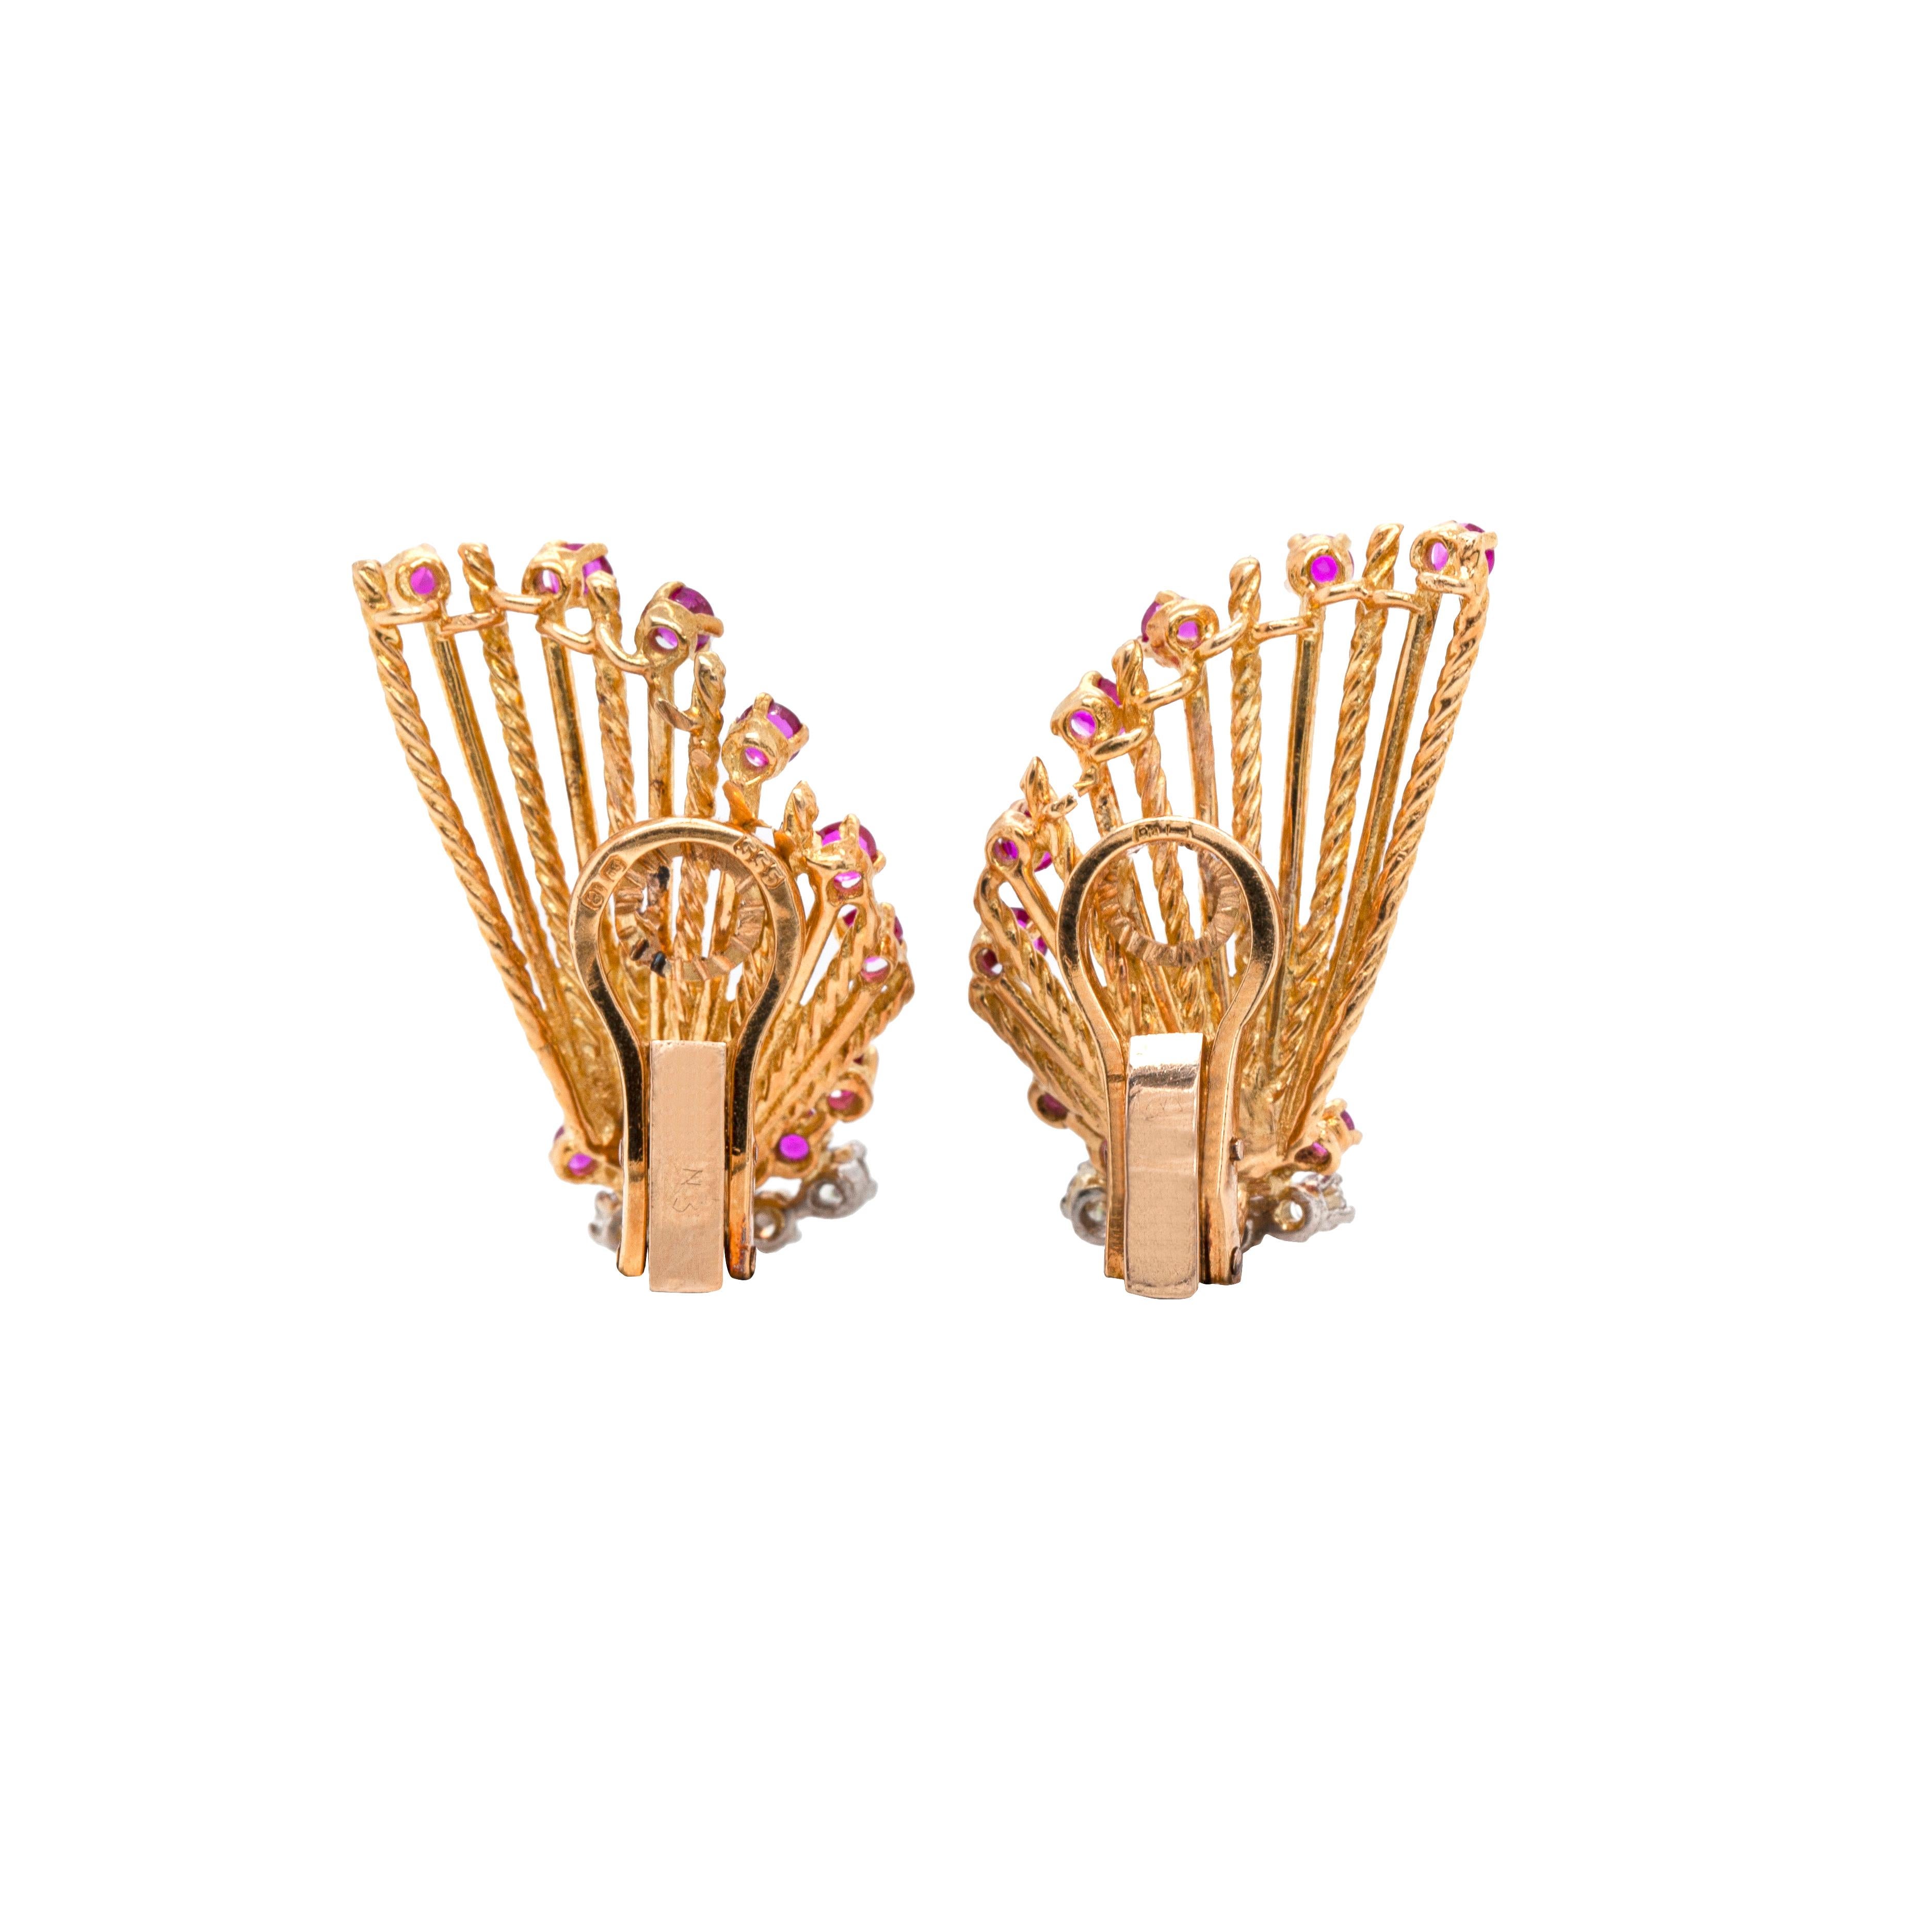 These stunning earrings are any Kutchinsky fan's must-have piece. And even if you're not, their vintage elegance is magnetic. 

We date these sumptuous fan-style earrings to the late 1960s or early 1970s. Set with an estimated 0.40 carats of